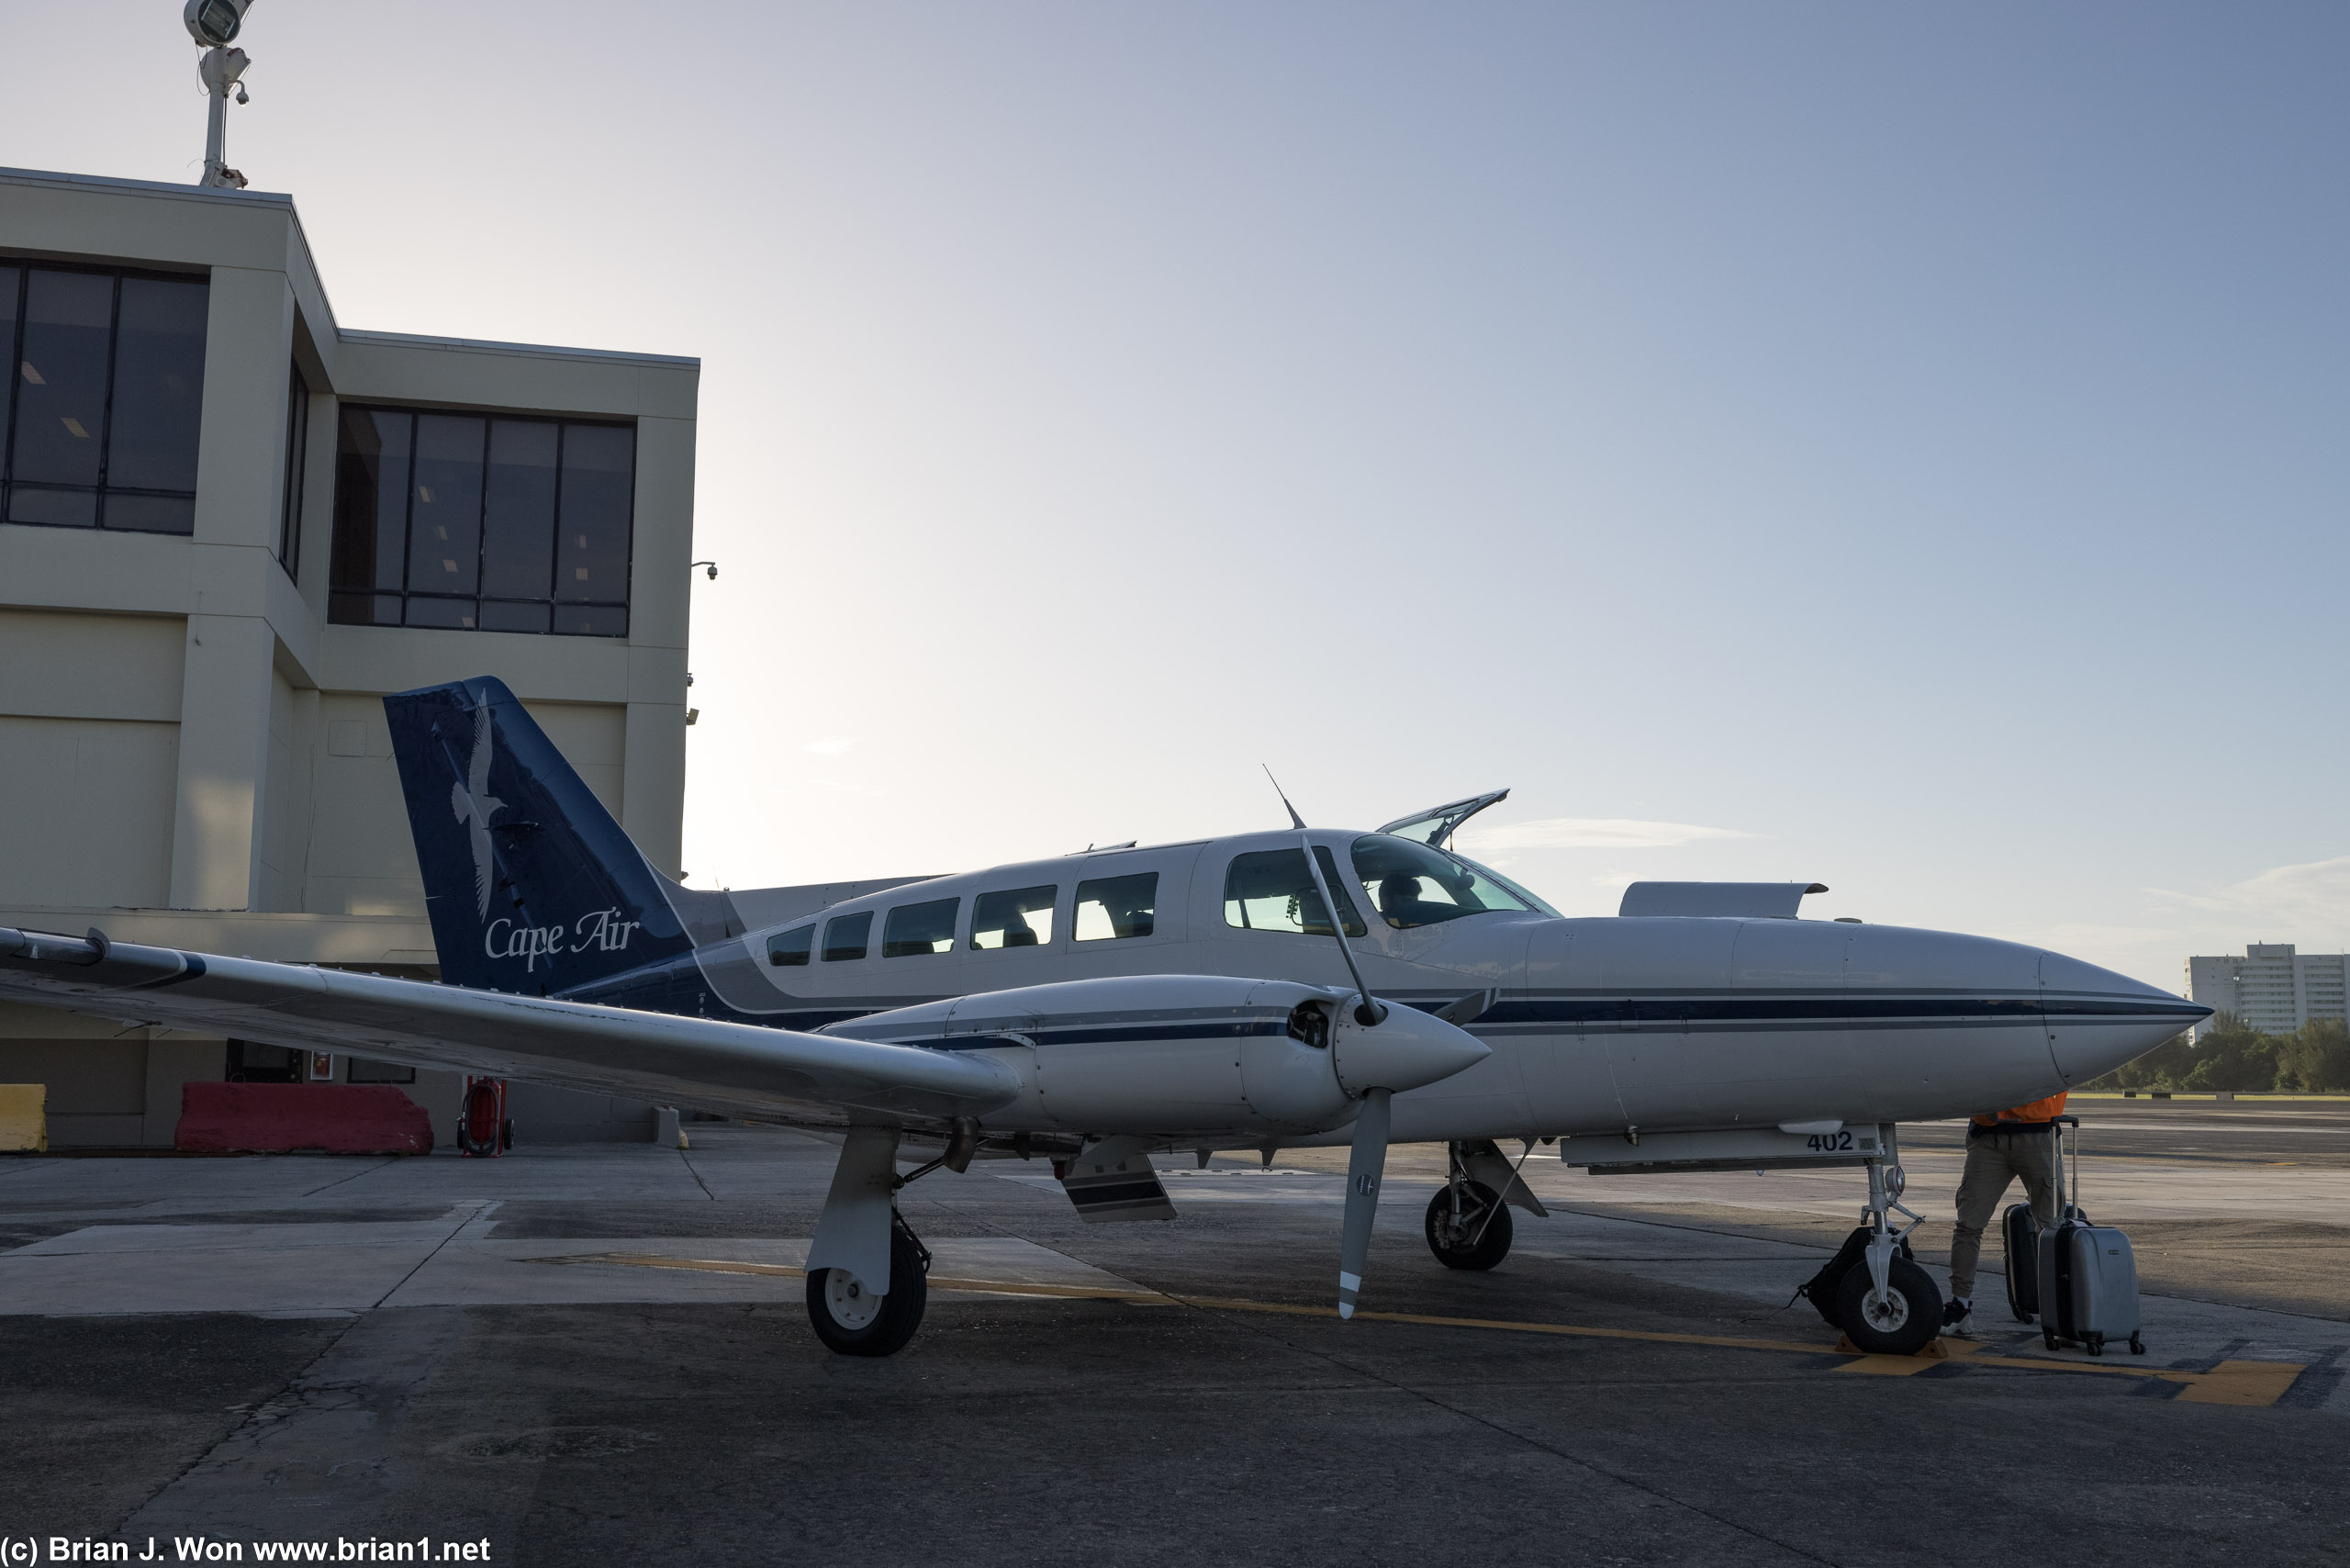 Third ride of the day, Cape Air Cessna 402C.